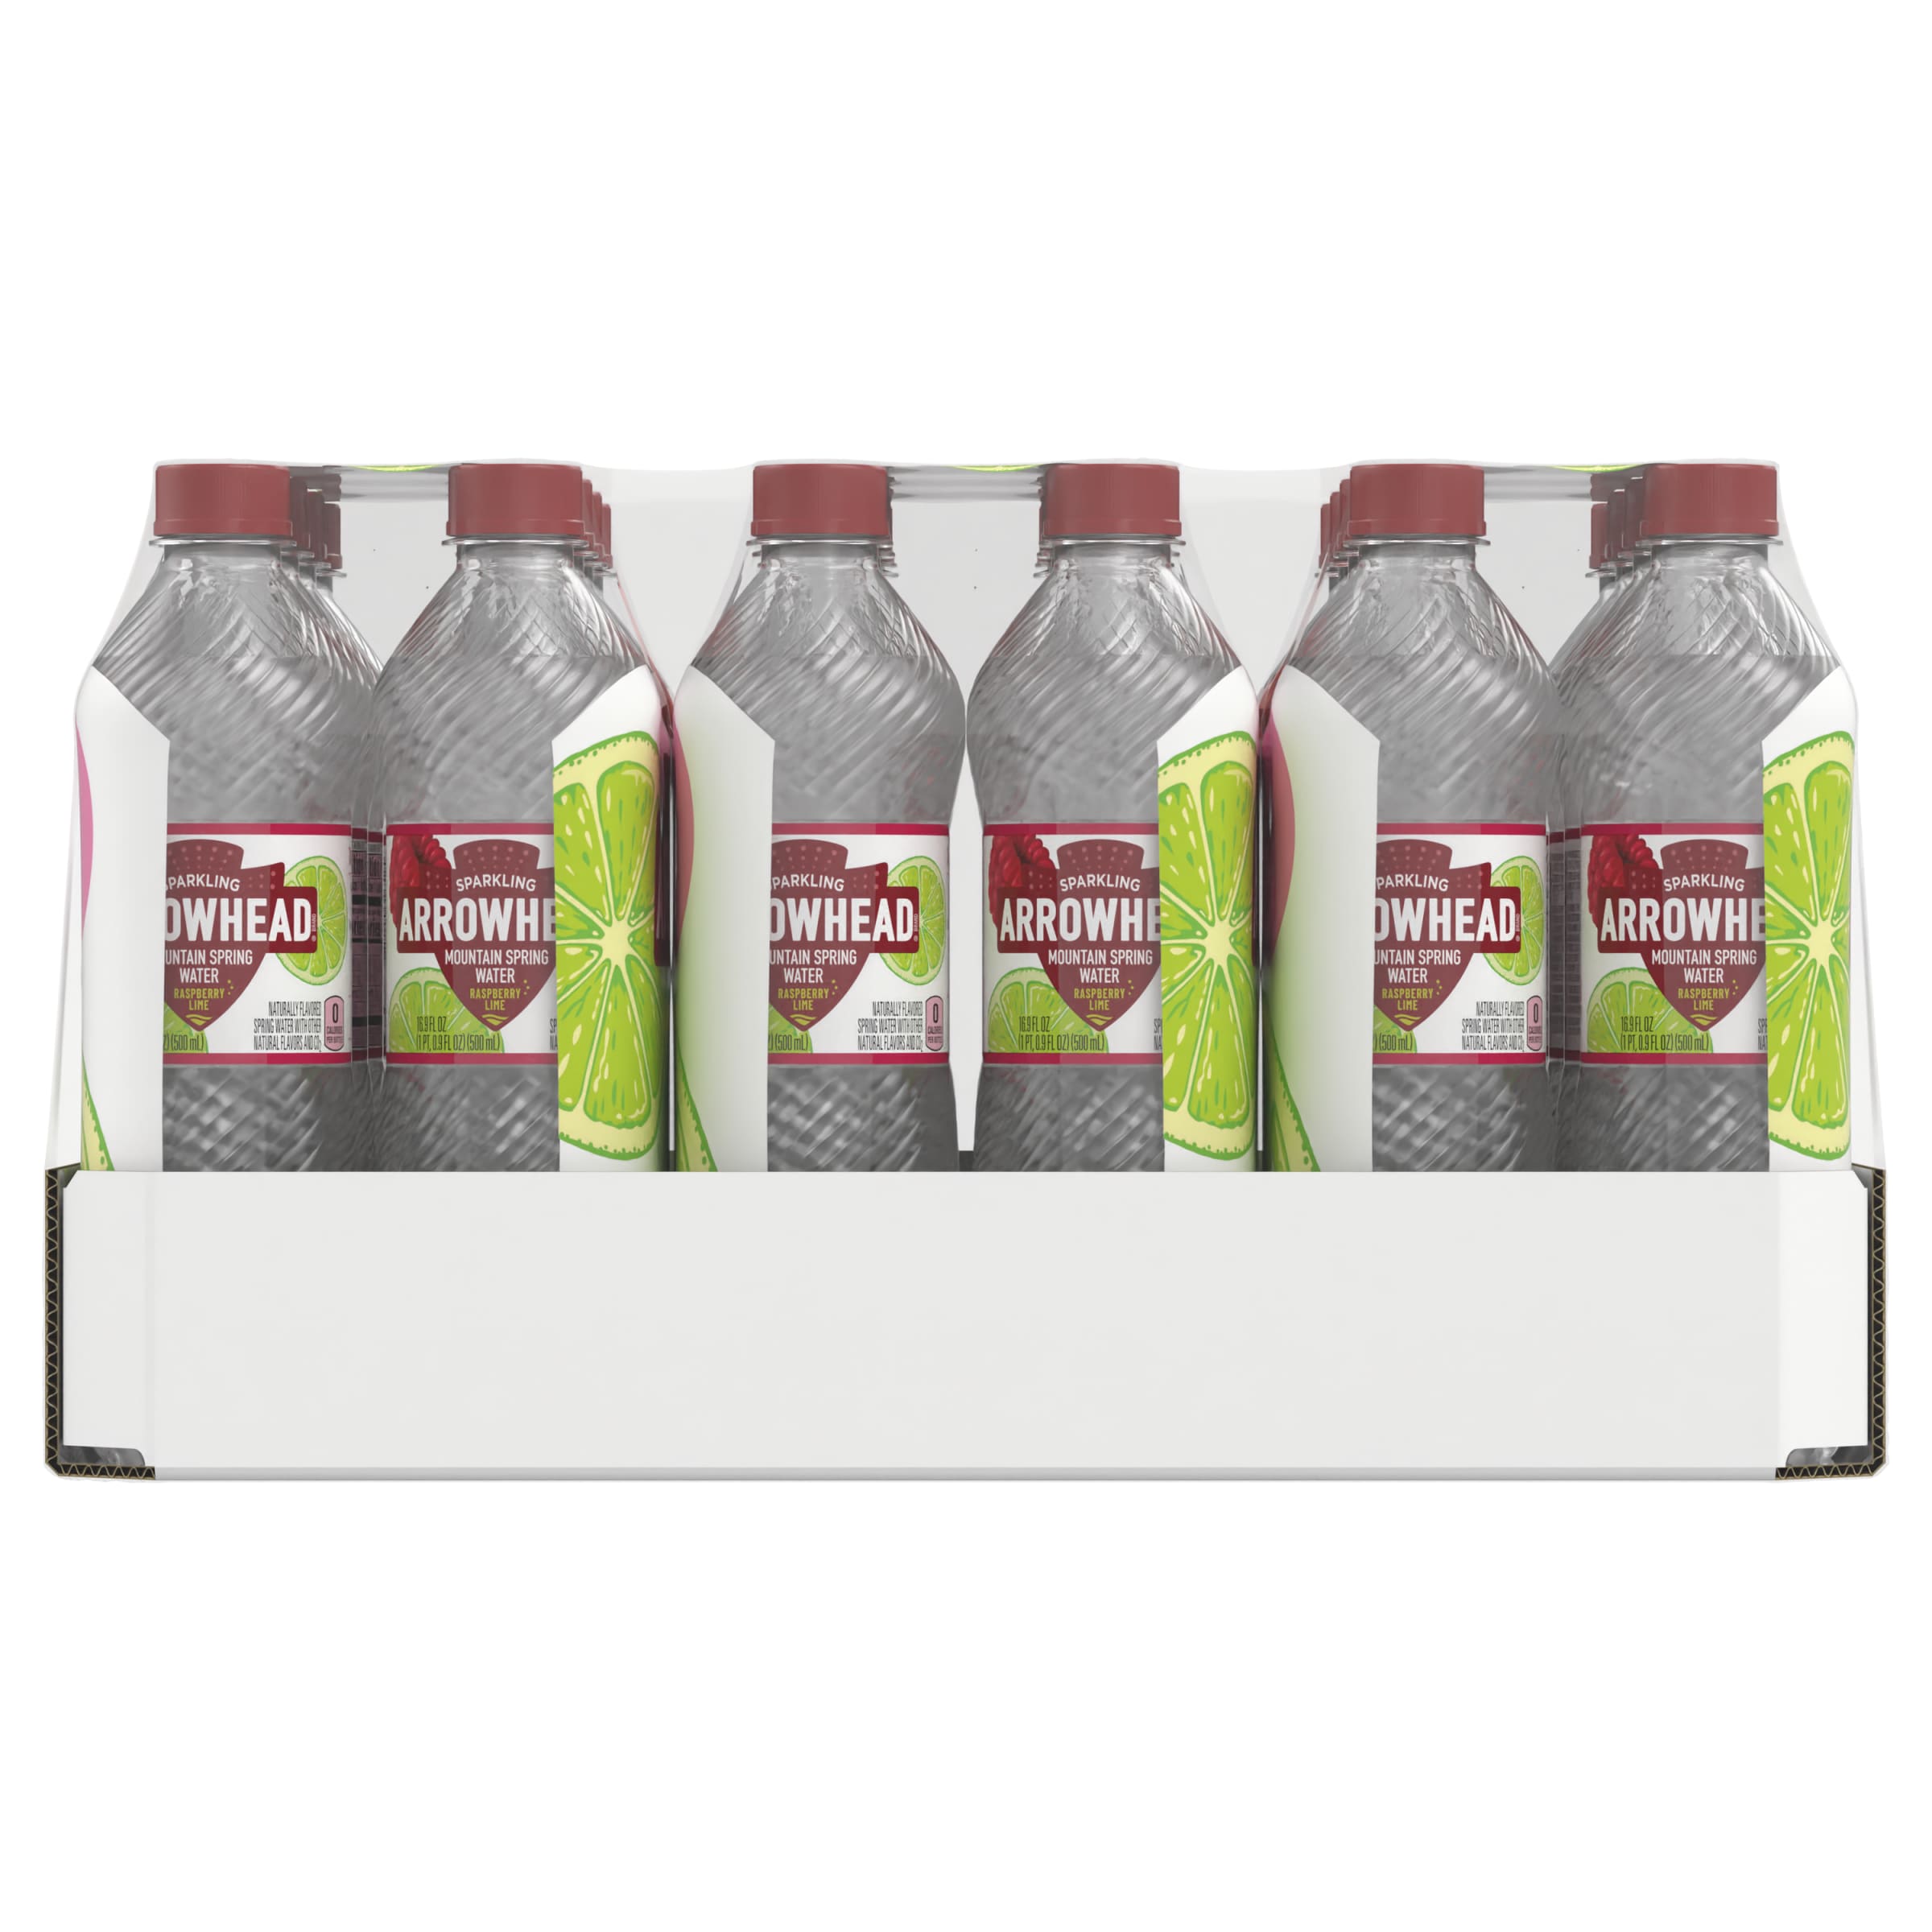 Arrowhead Sparkling Water, Raspberry Lime, 16.9 oz. Bottles (24 Count) - image 2 of 6